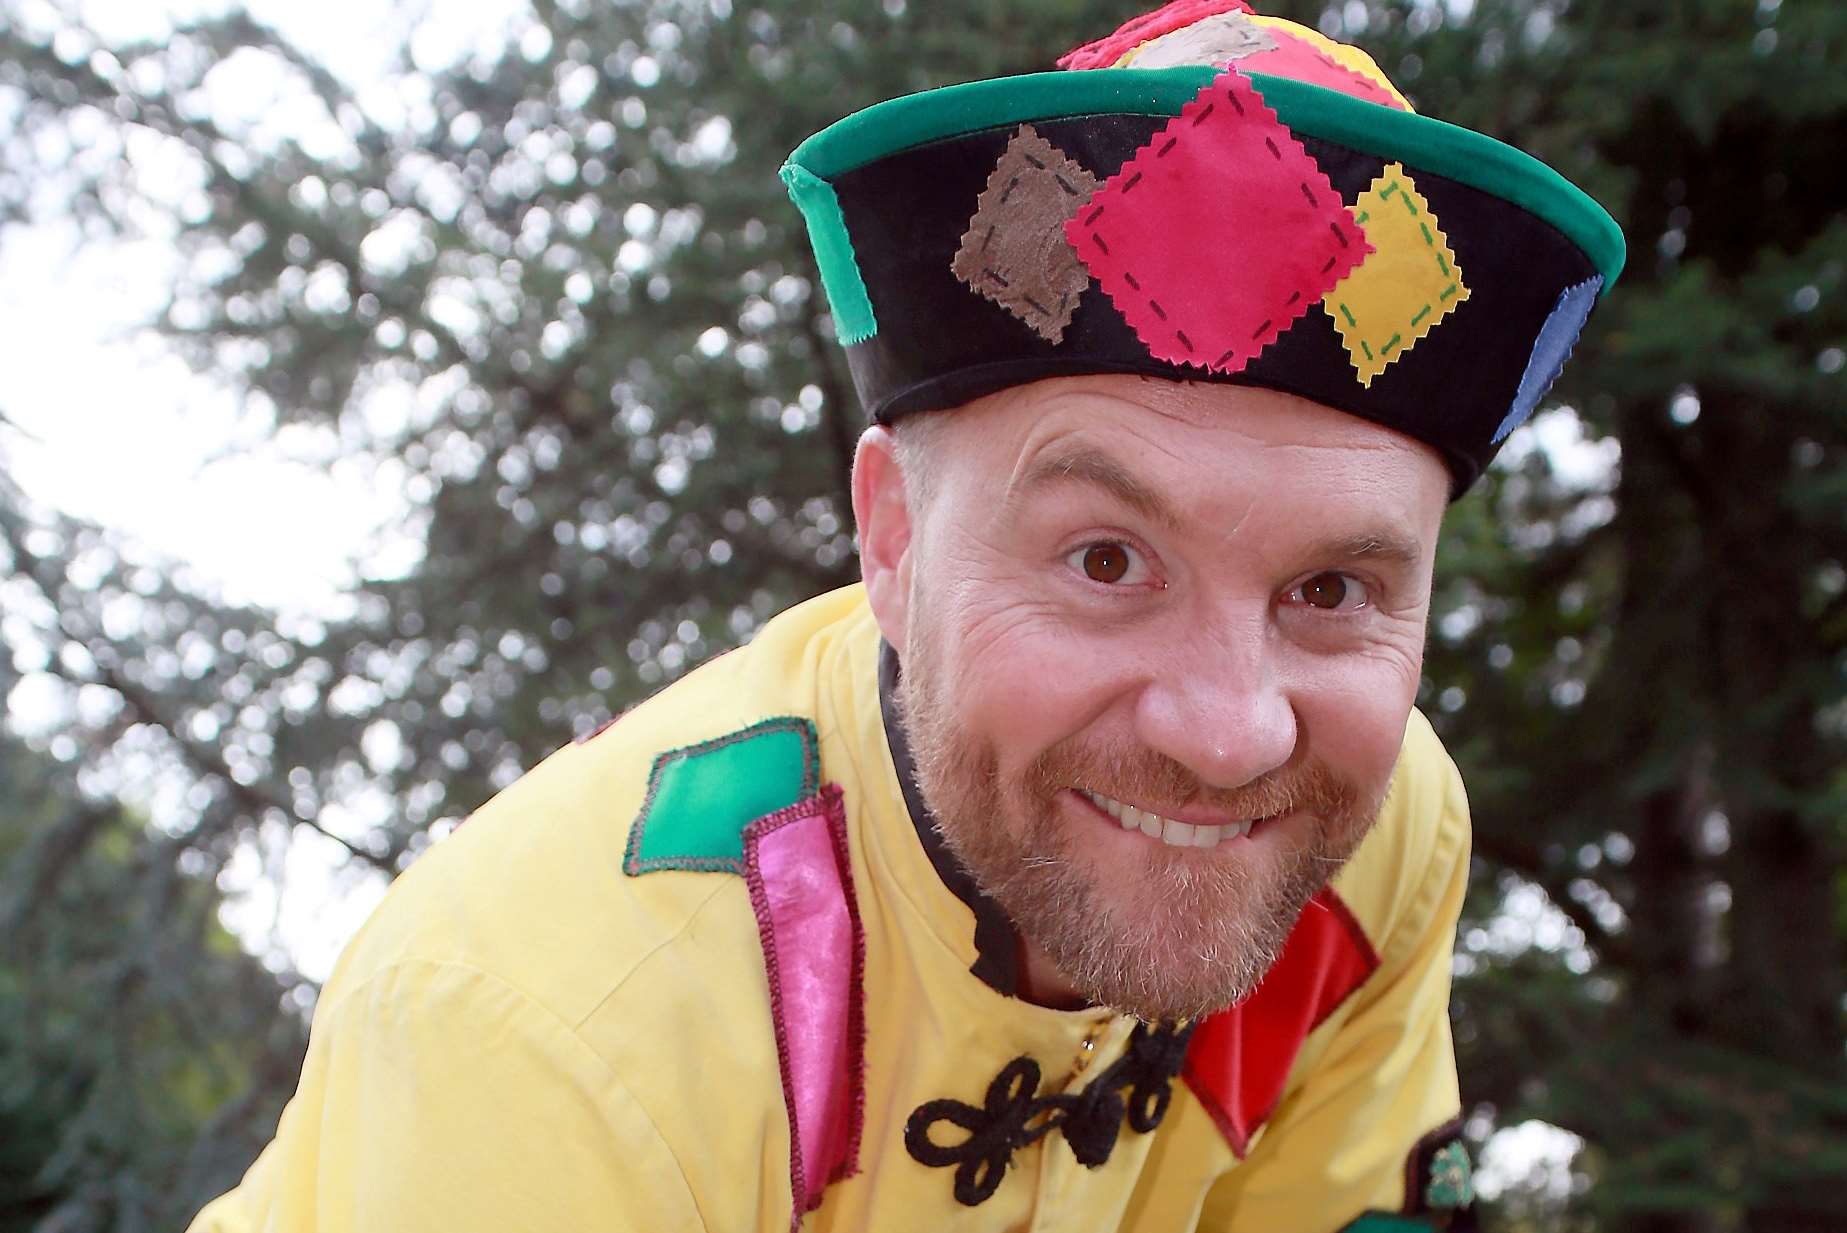 Basil Brush Show star Chris Pizzey will be spending Christmas in thw Weald Picture: Phil Lee